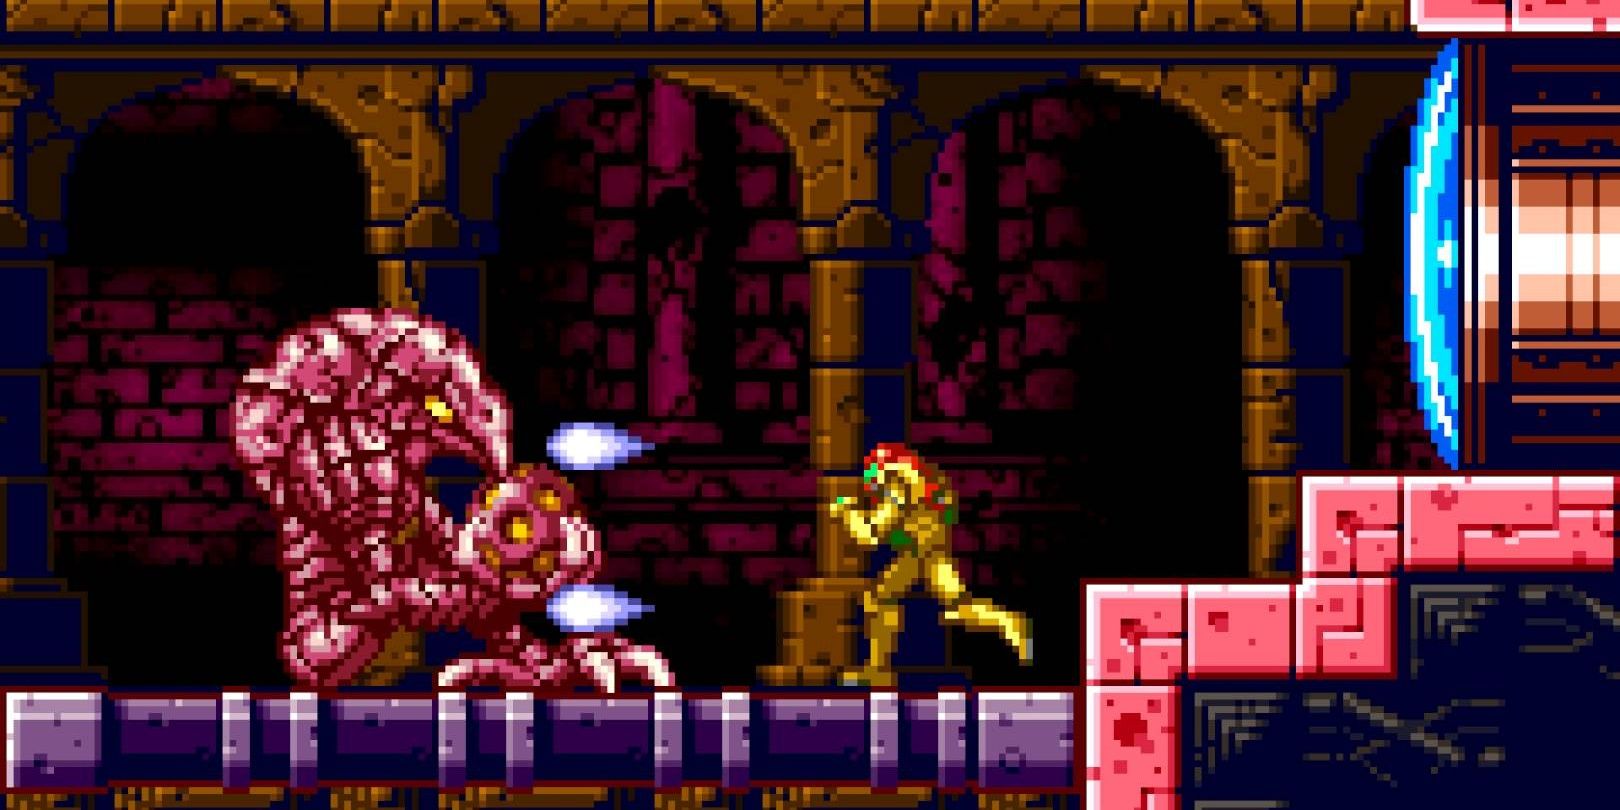 A screenshot showing gameplay from Metroid: Zero Mission